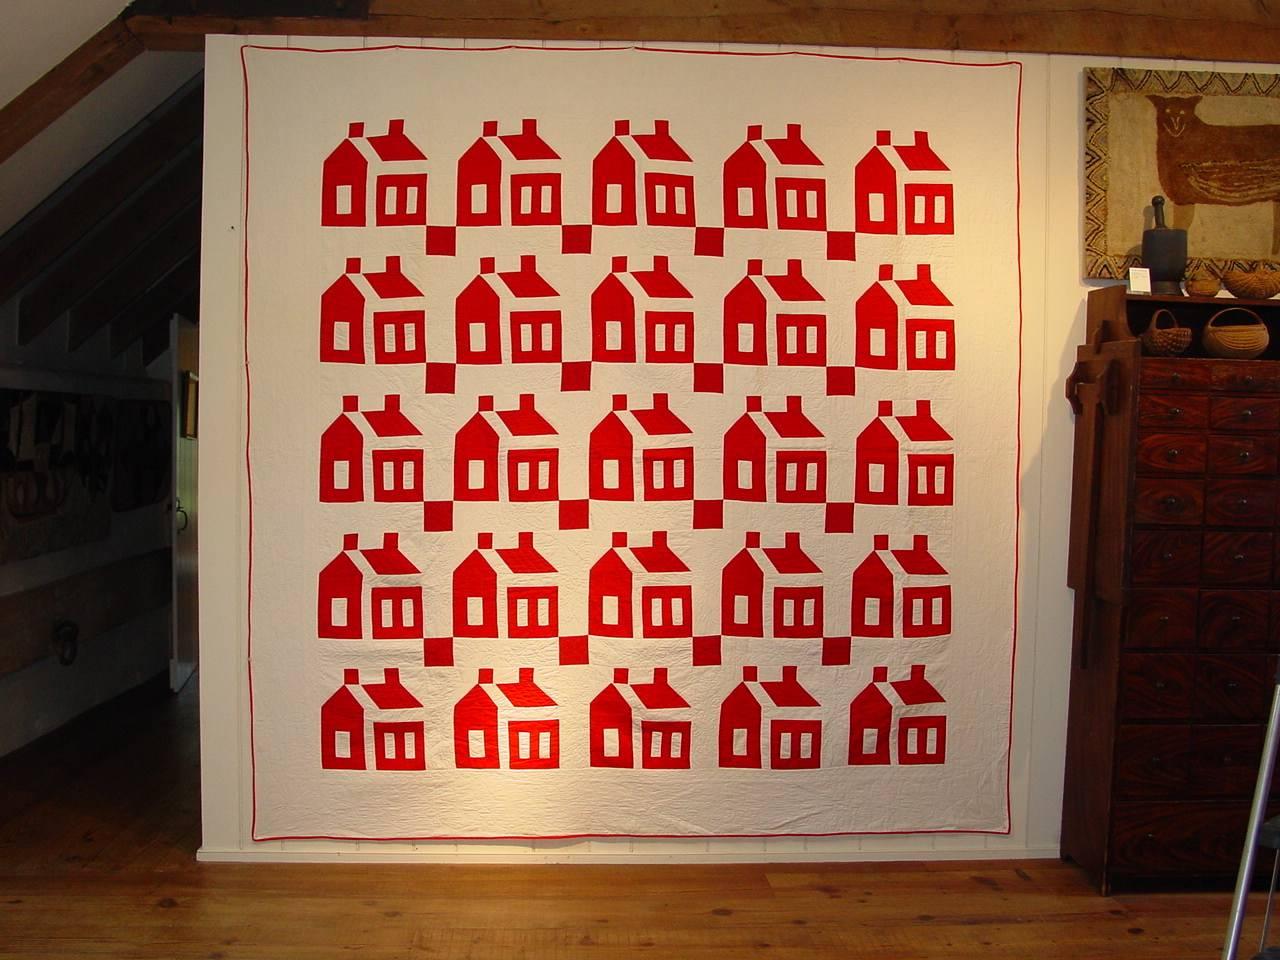 The wide spacing between the components of each of the 25 red houses against the white ground create an overall abstract quality to this cotton quilt with such exceptional floral and diamond quilting.  Likely made in New England and a wonderfully